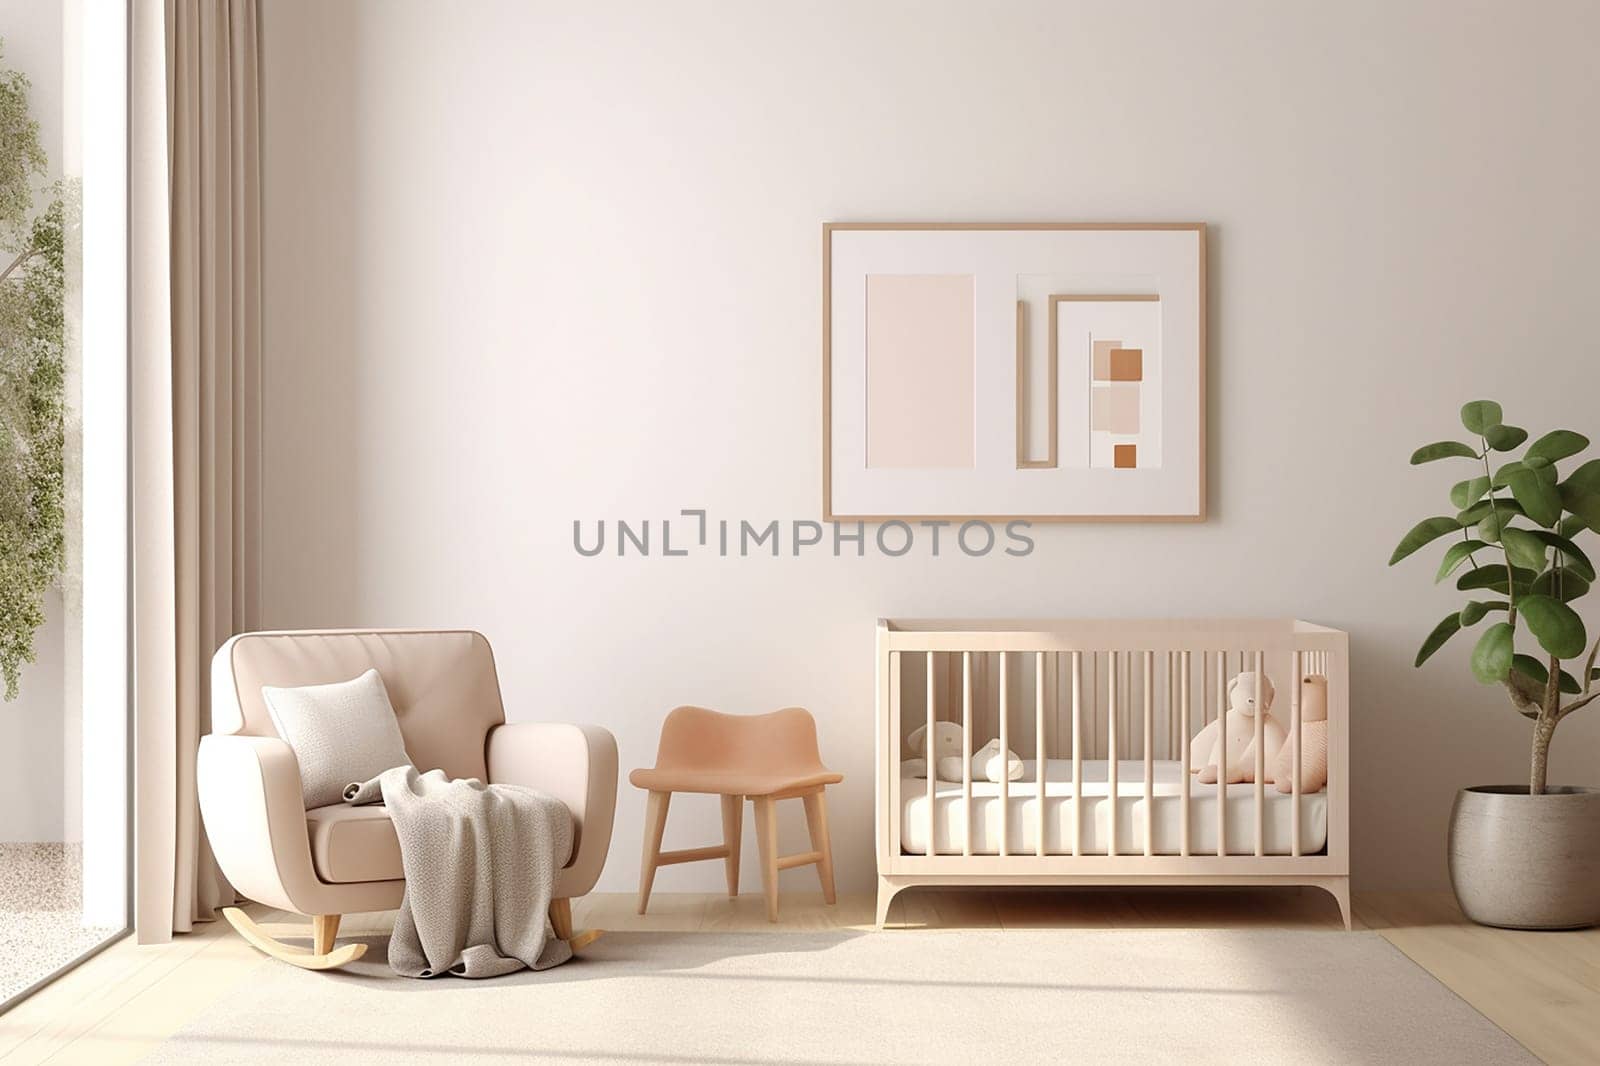 A mock up frame in a nursery room with a crib, armchair, and houseplant in a minimalist style